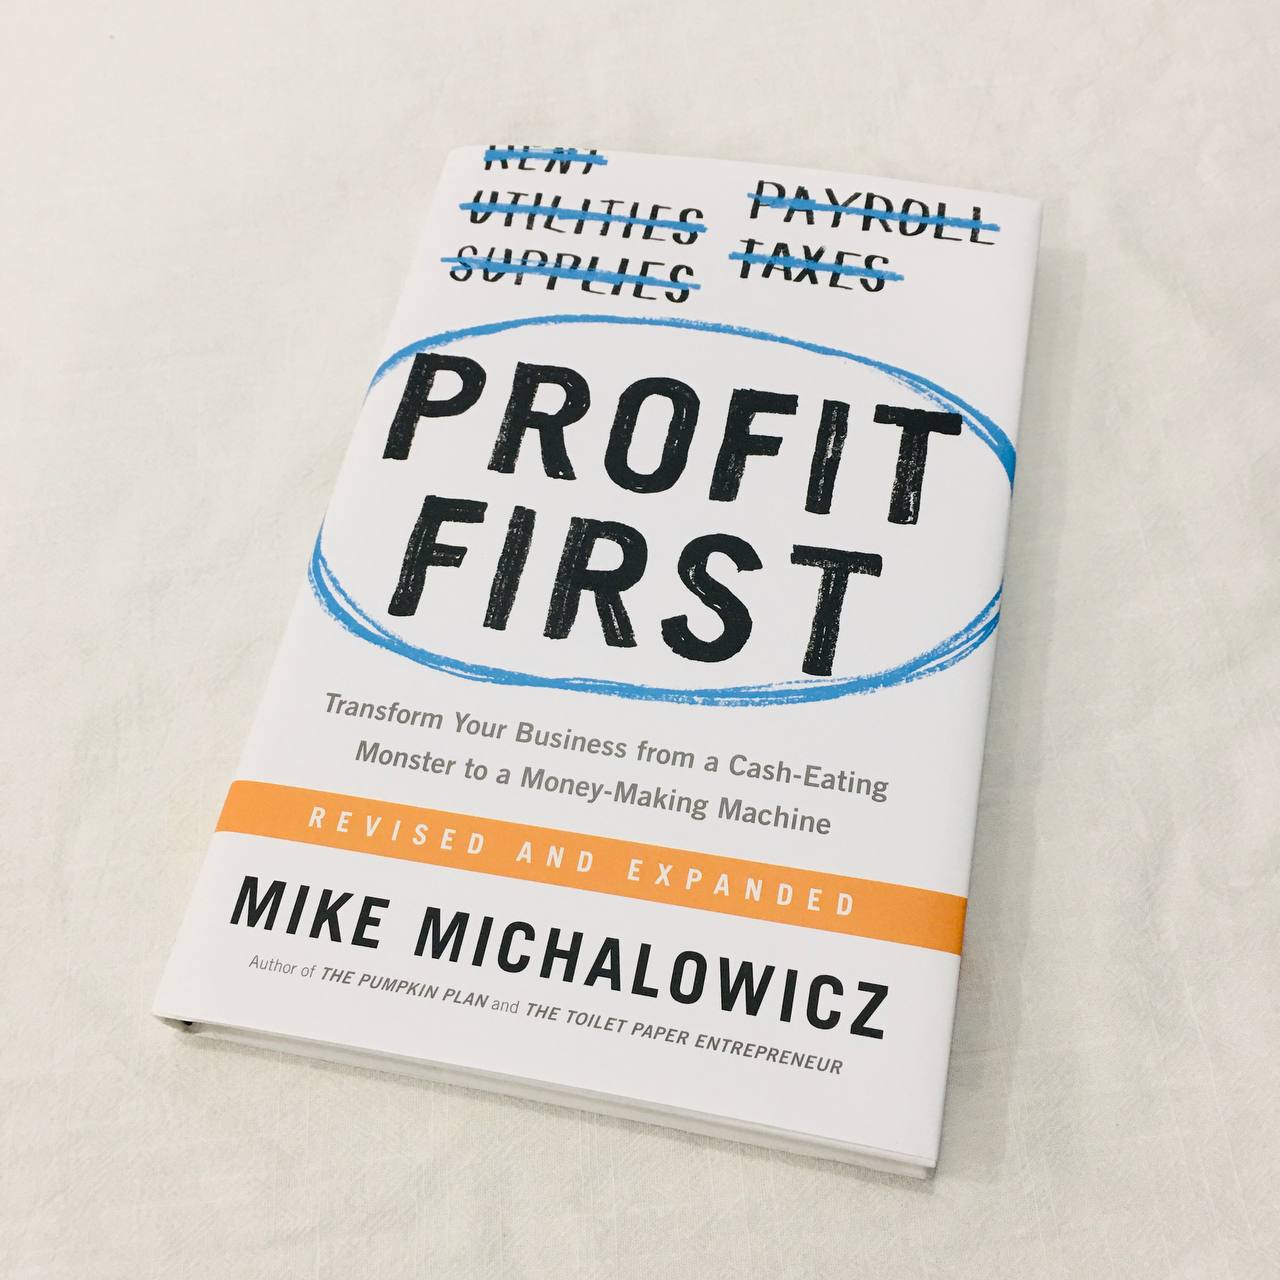 Book Profit First by Mike Michalowicz